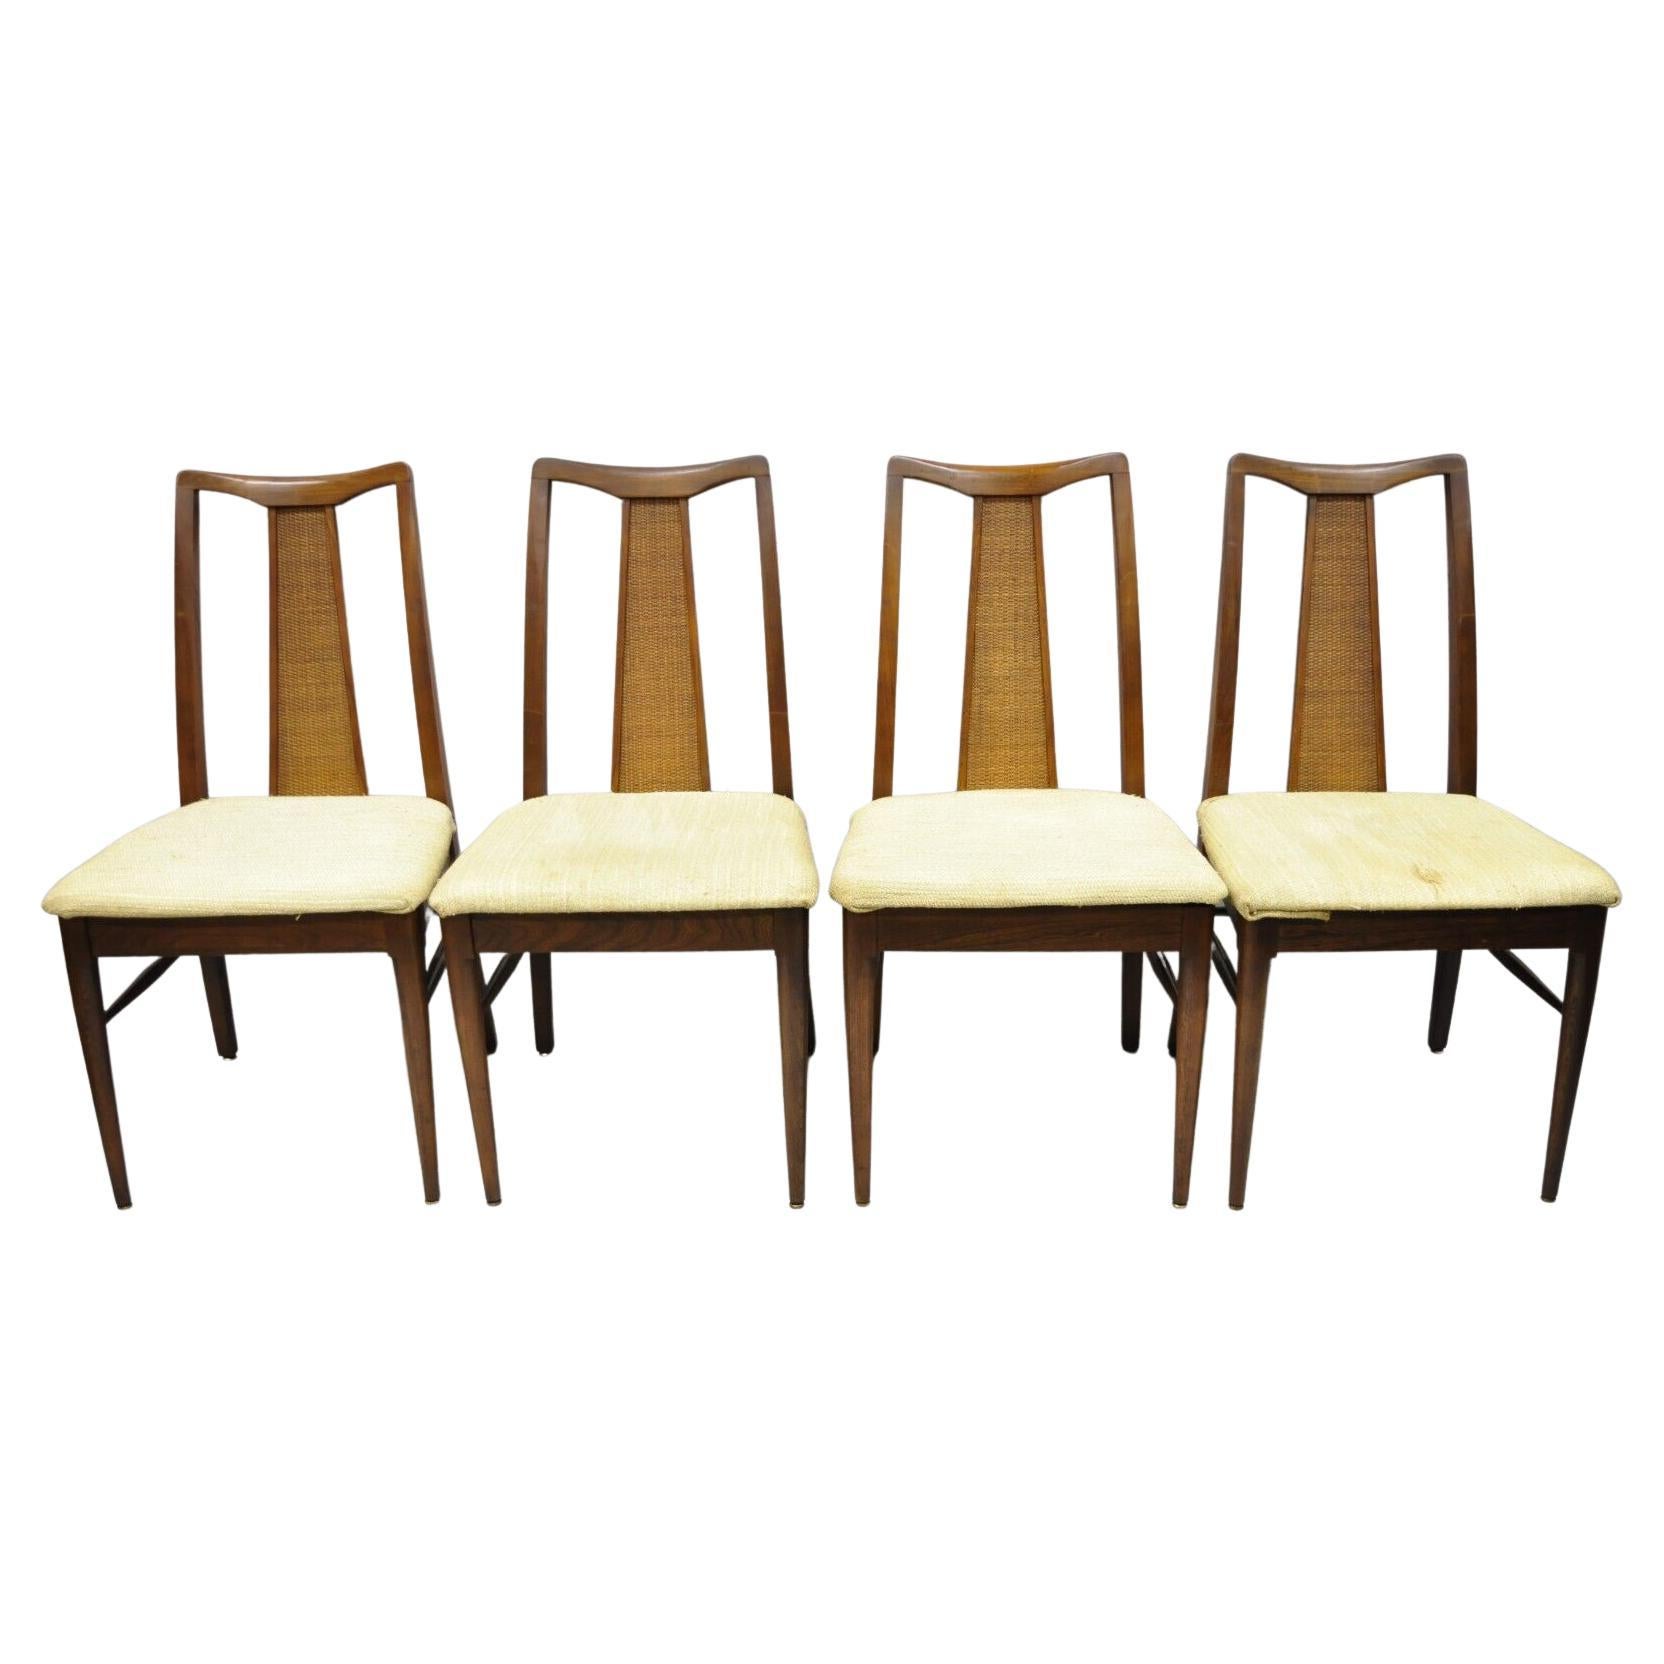 Vintage Mid-Century Modern Walnut Cane Back Dining Chairs, Set of 4 For Sale